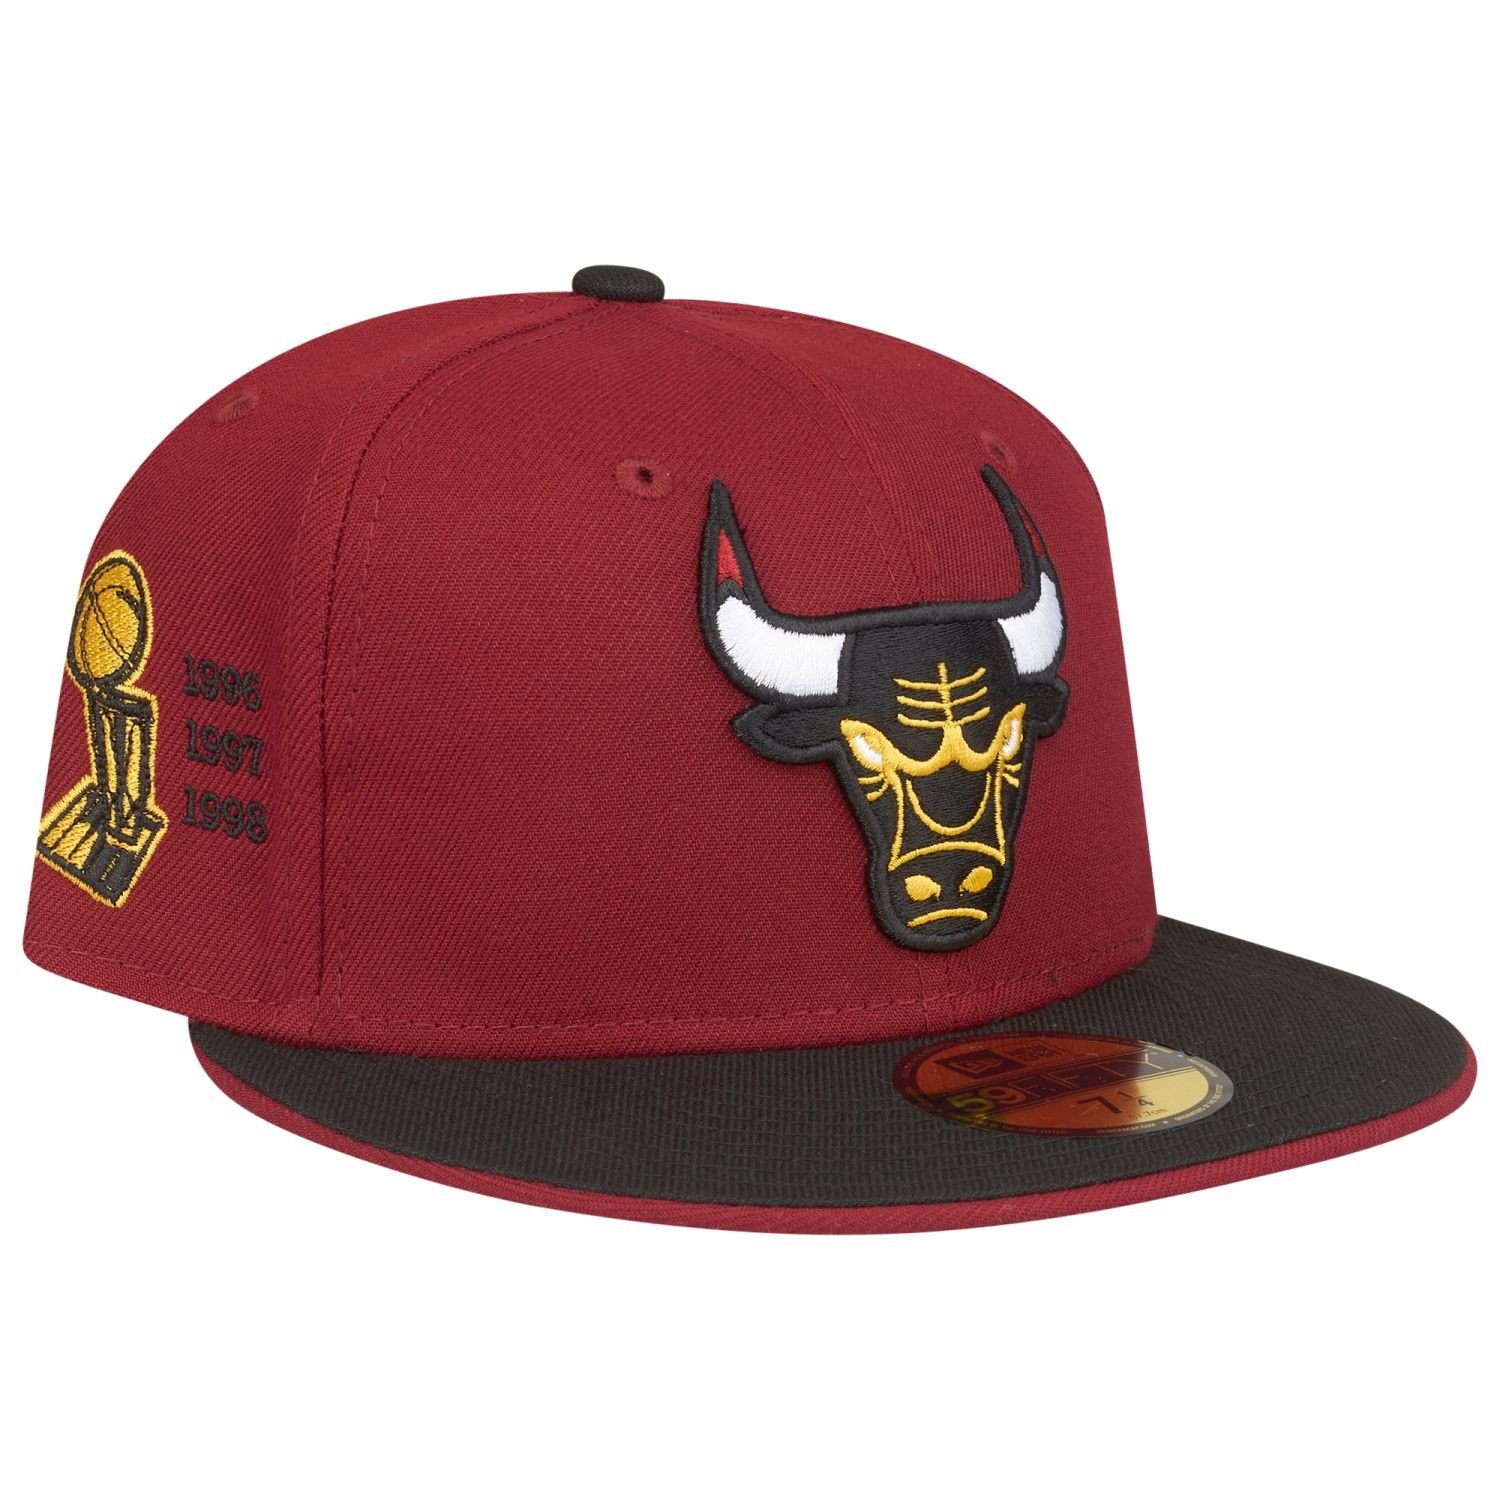 New Era Fitted Cap 59Fifty CHAMPIONS Chicago Bulls